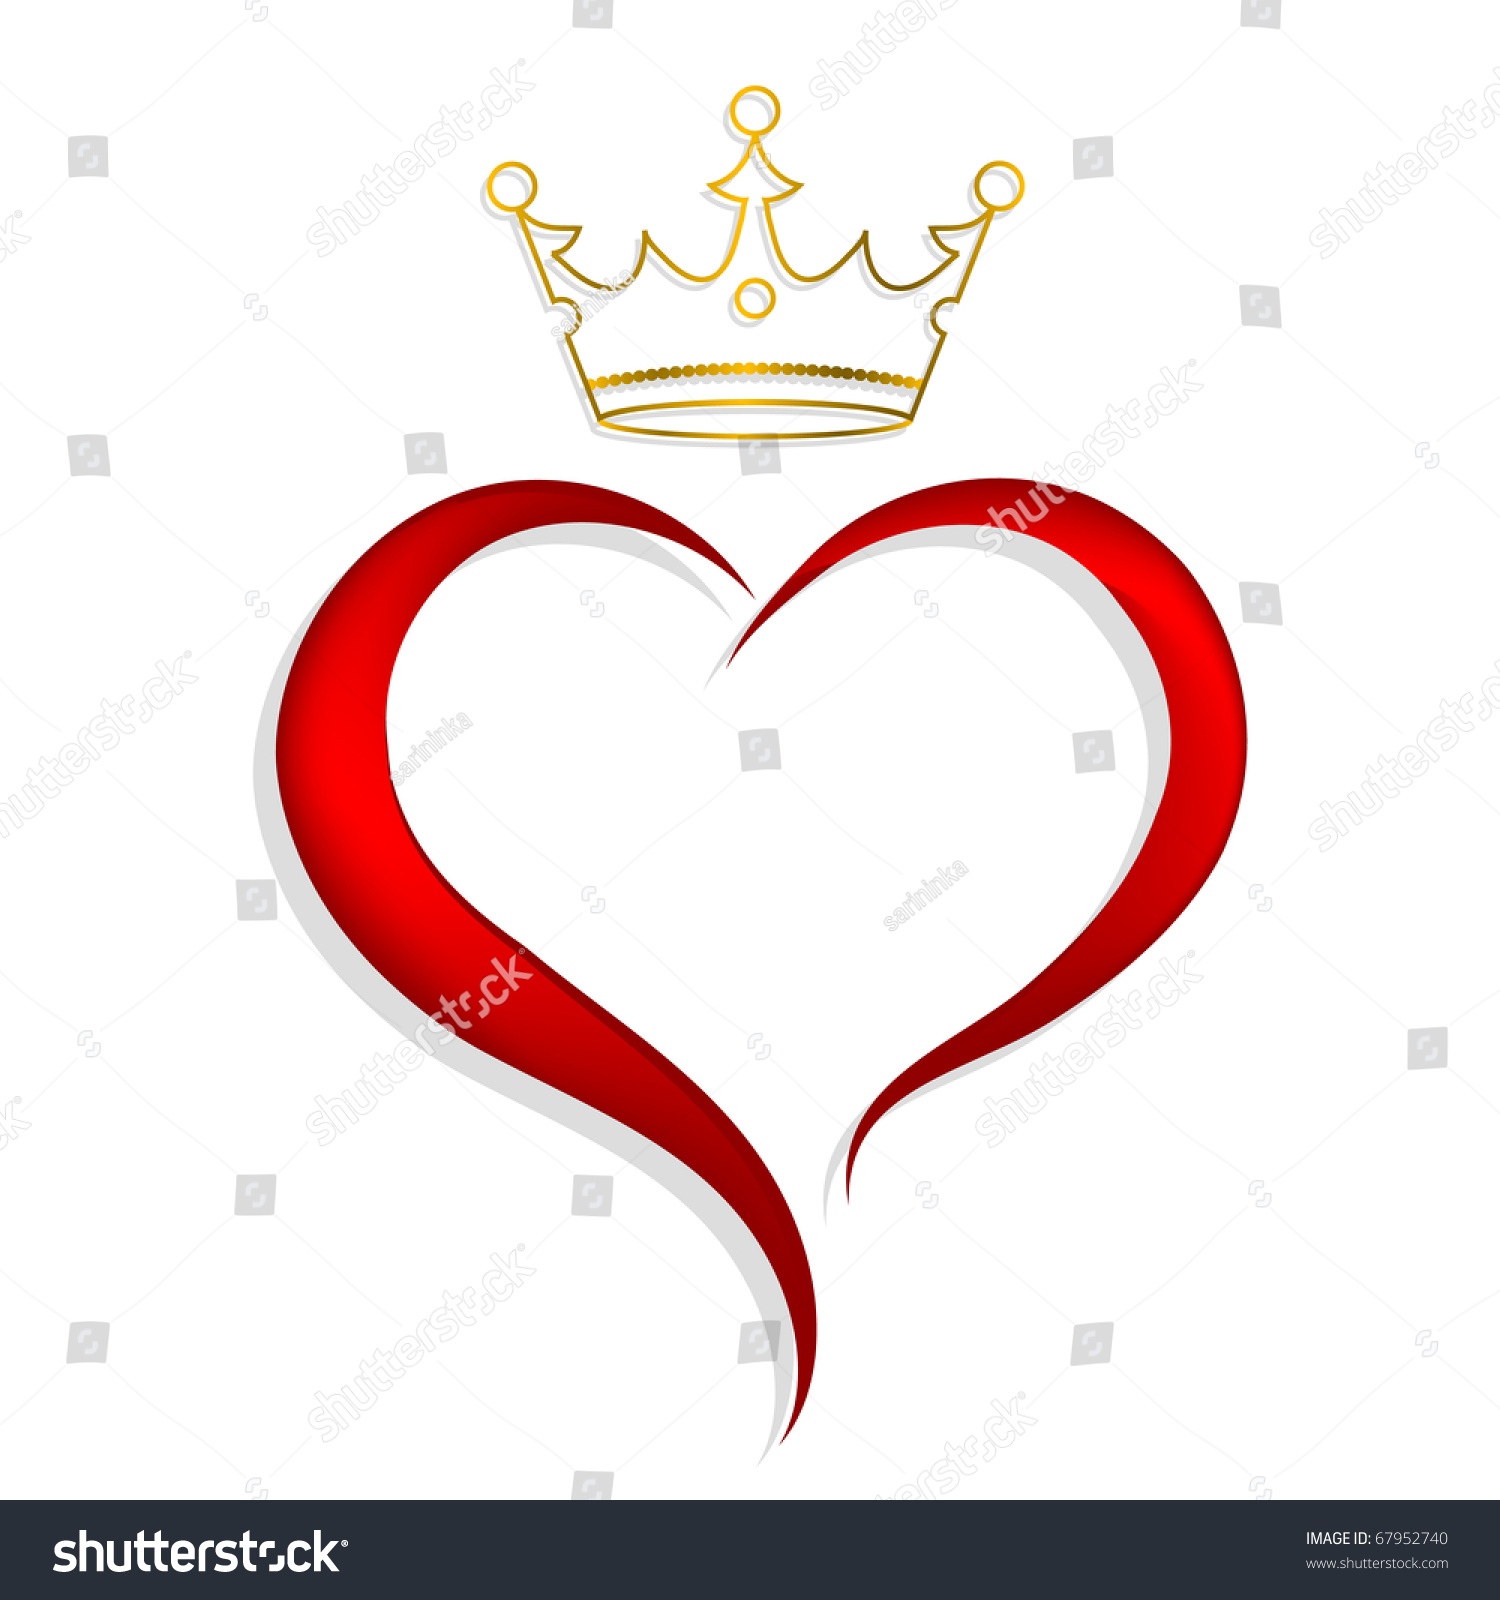 Red Heart With Golden Crown Stock Vector Illustration 67952740 ...